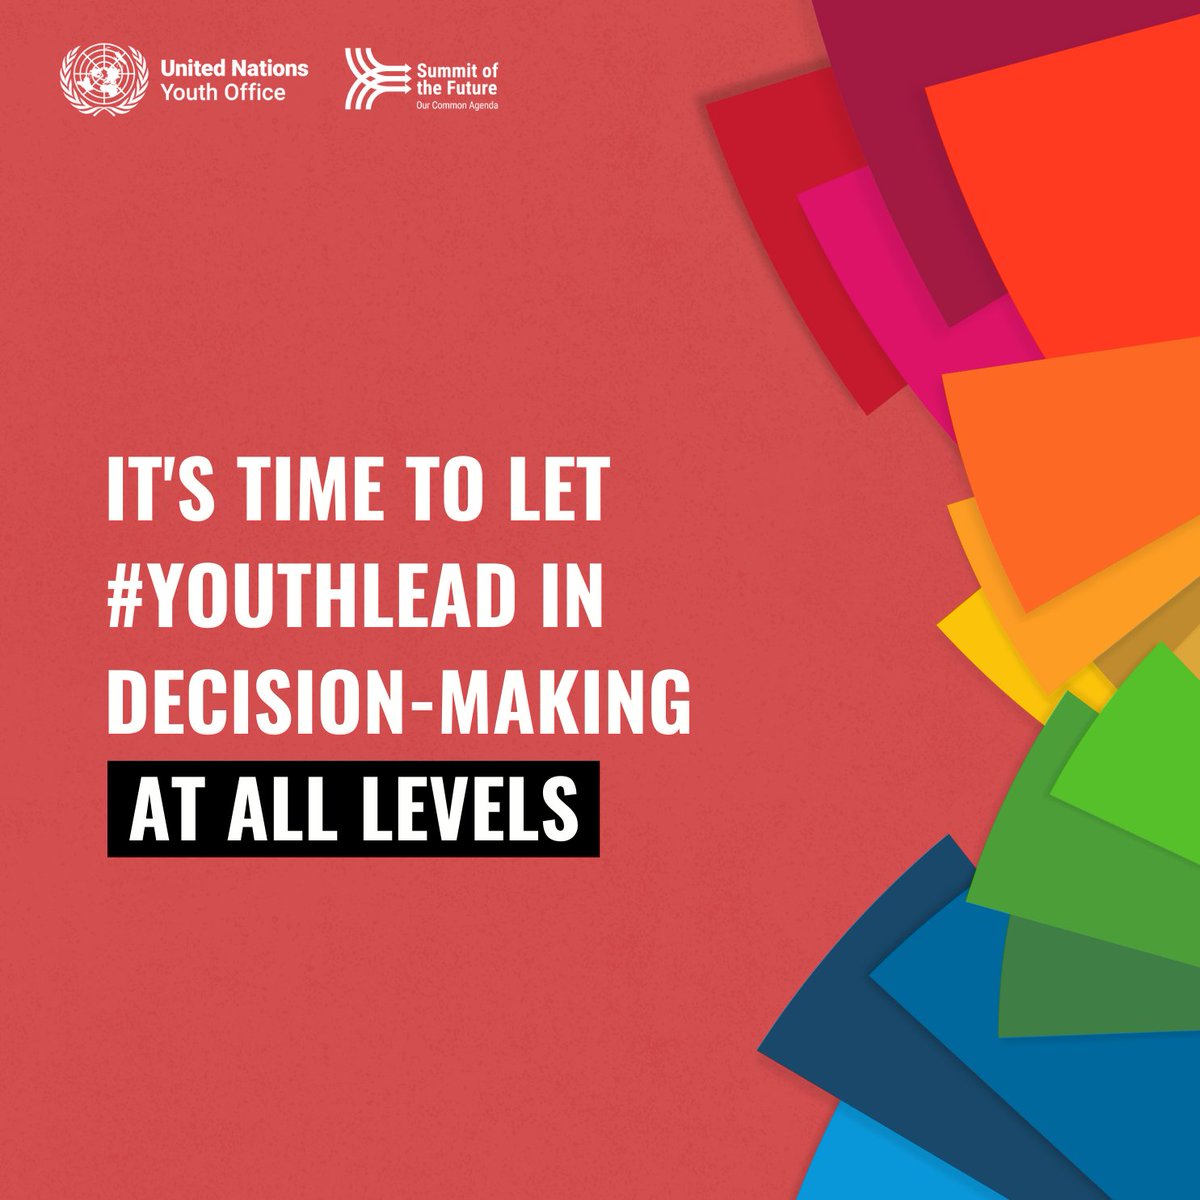 Young people & allies: Join us @UNYouthAffairs in calling on world leaders to take immediate action to ensure greater youth representation in all spheres of decision-making 🙋. It's time to let #YouthLead 💪 #ActNow: Sign the open letter ✍️ bit.ly/LetYouthLead